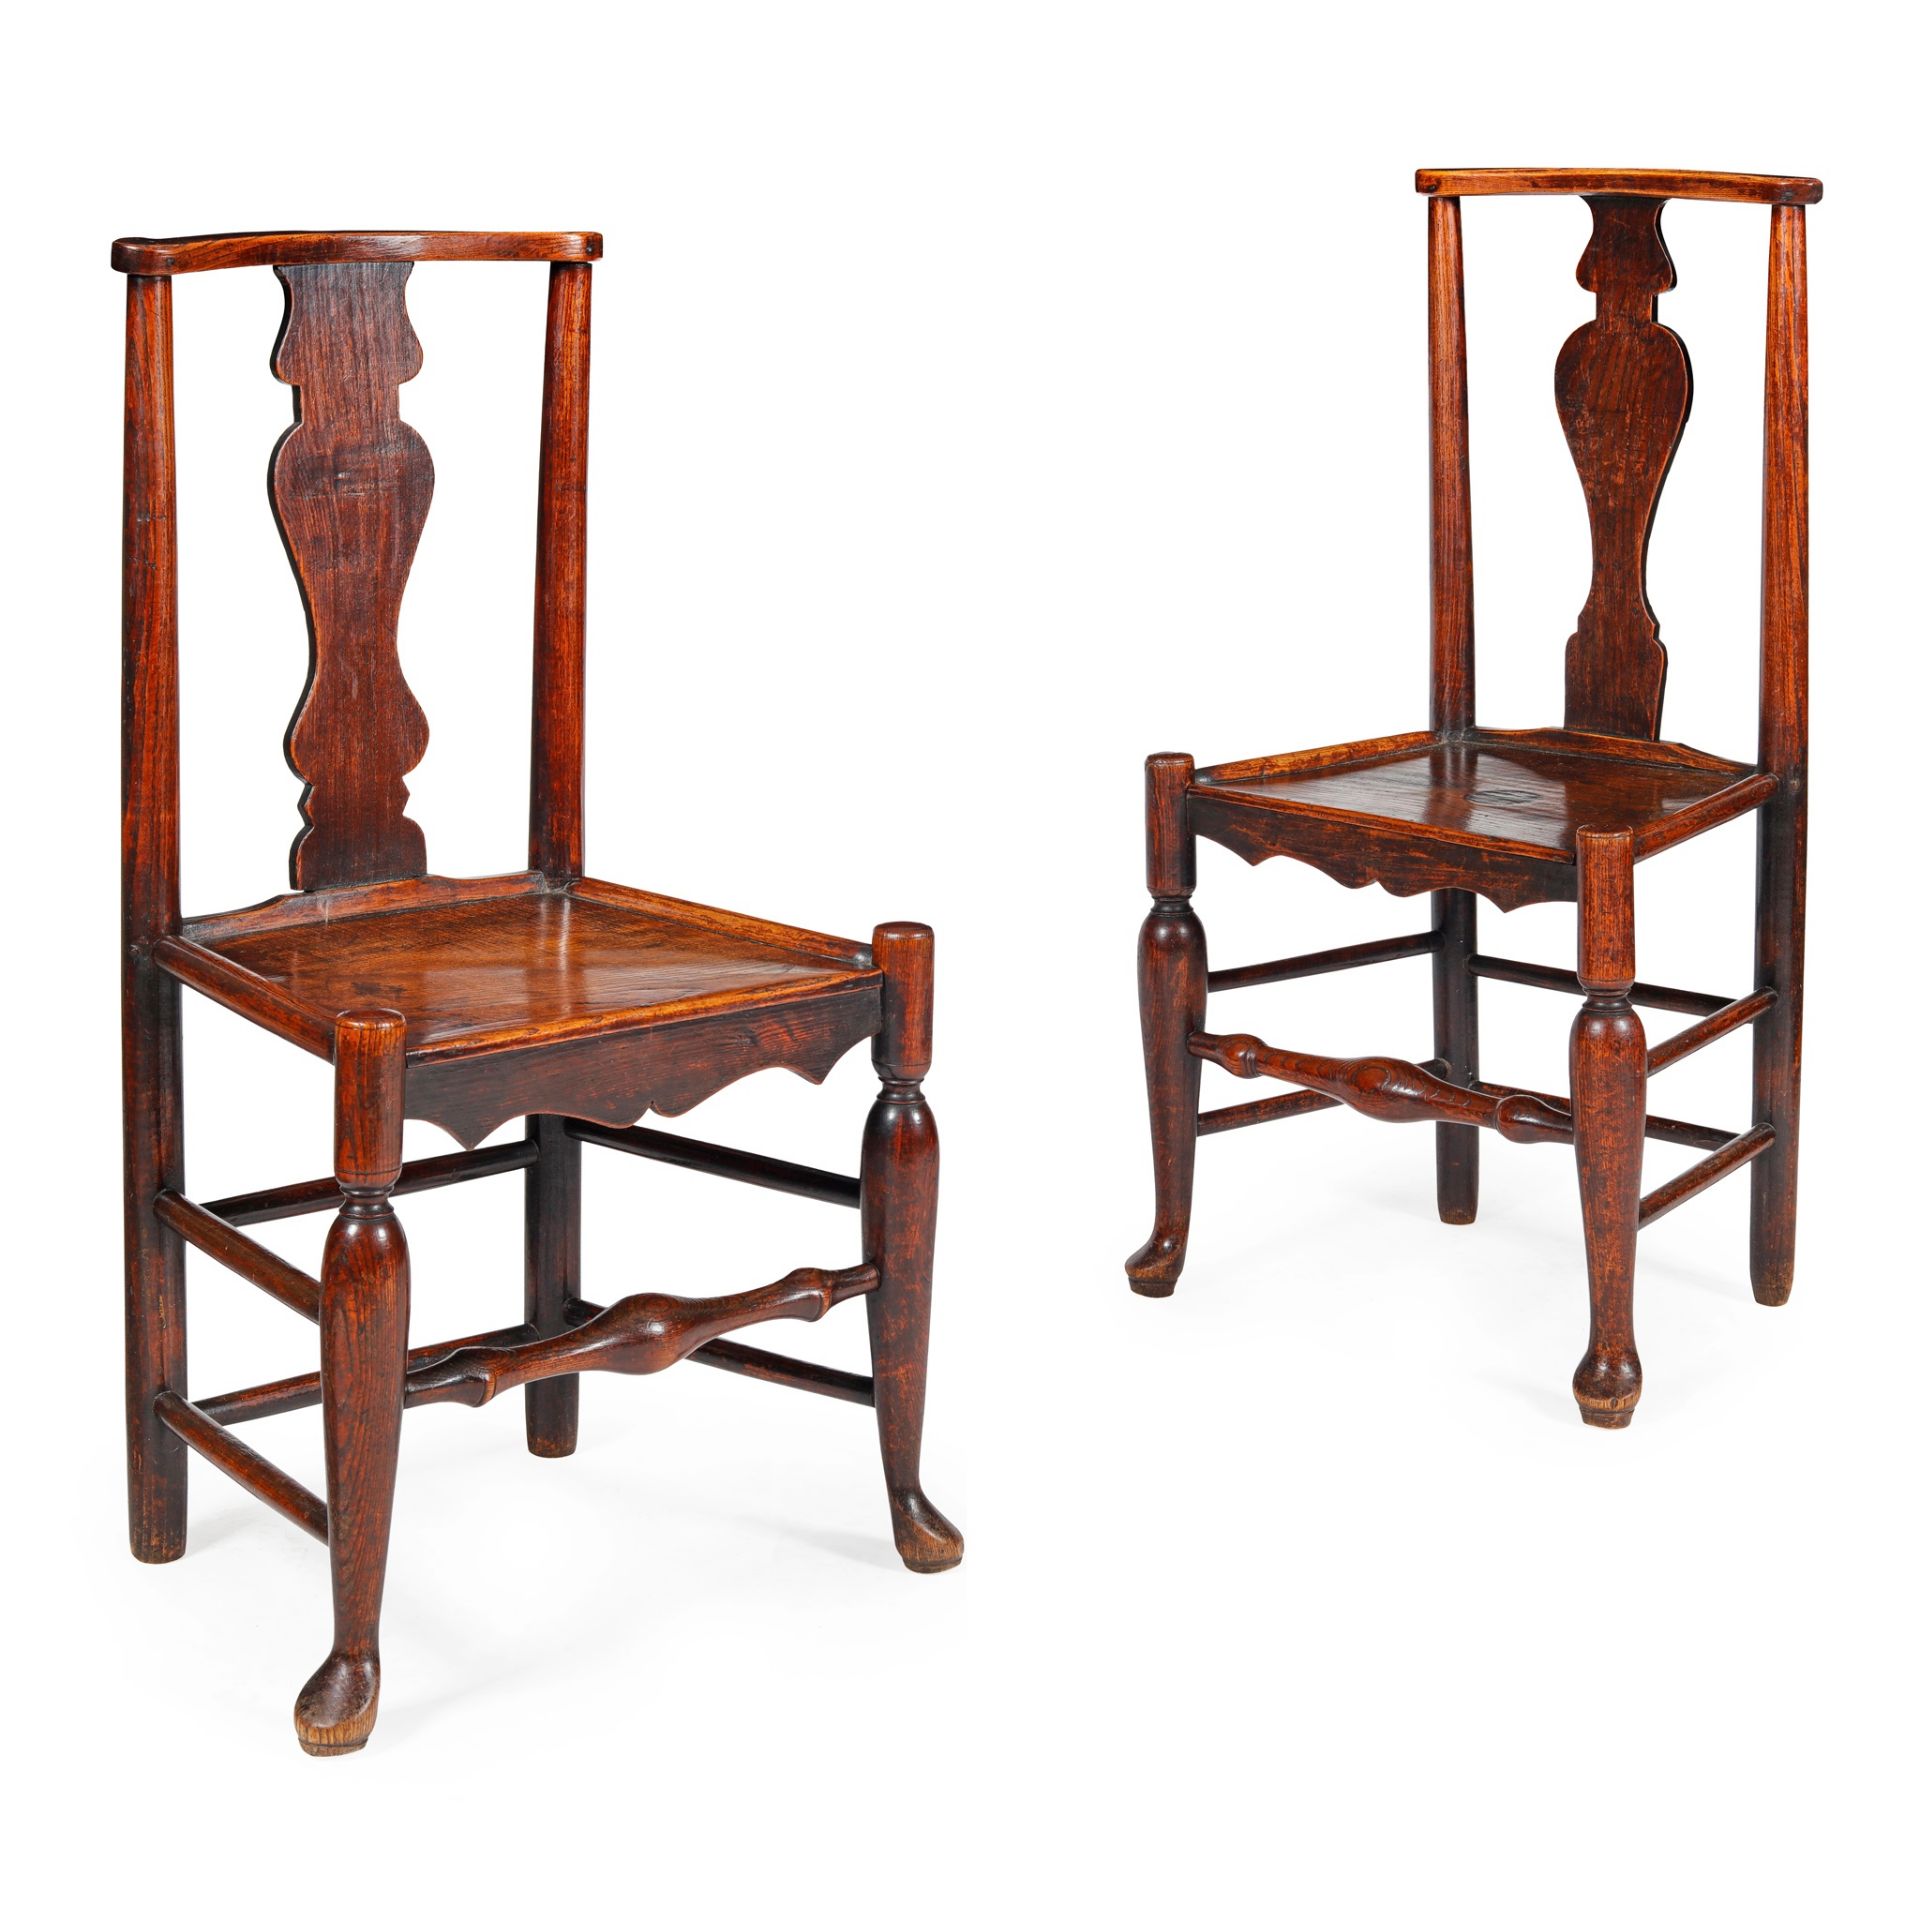 PAIR OF GEORGIAN PROVINCIAL ASH SIDE CHAIRS EARLY 19TH CENTURY